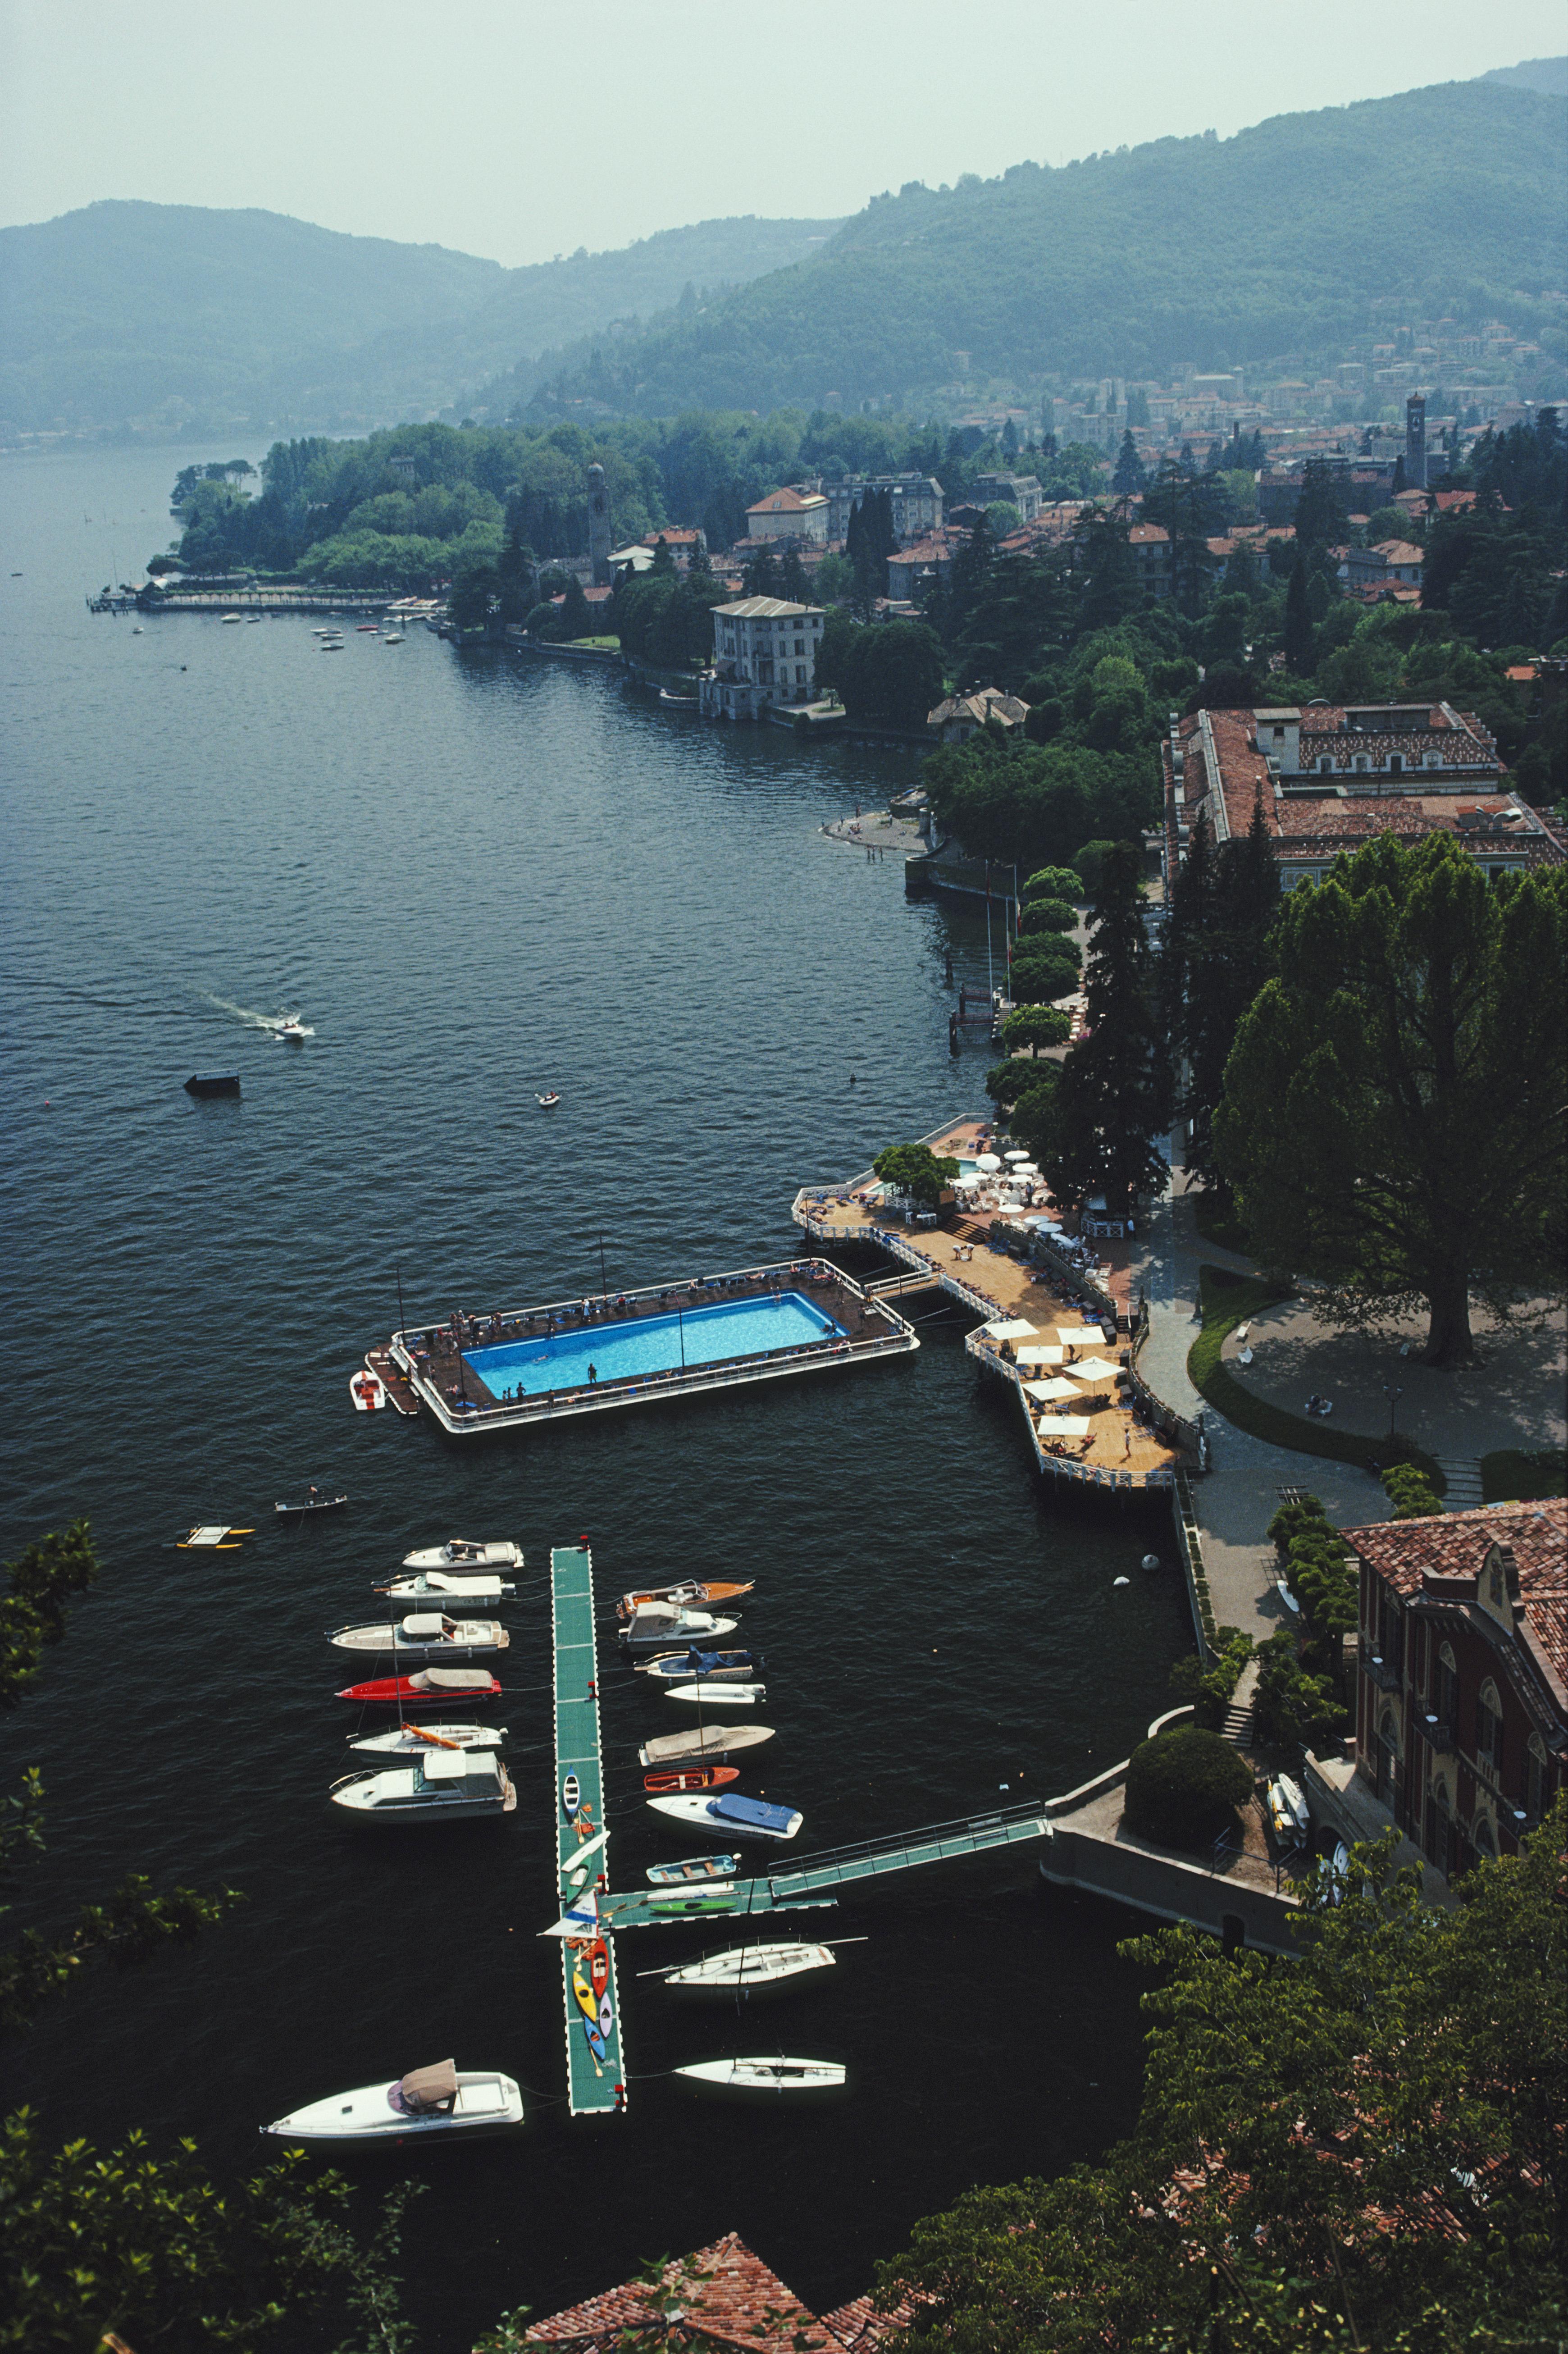 'Hotel On Lake Como' 1983 Slim Aarons Limited Estate Edition Print 

The swimming pool and jetty at the Villa d'Este Hotel, Lake Como, Italy, June 1983. 

Produced from the original transparency
Certificate of authenticity supplied 
Archive